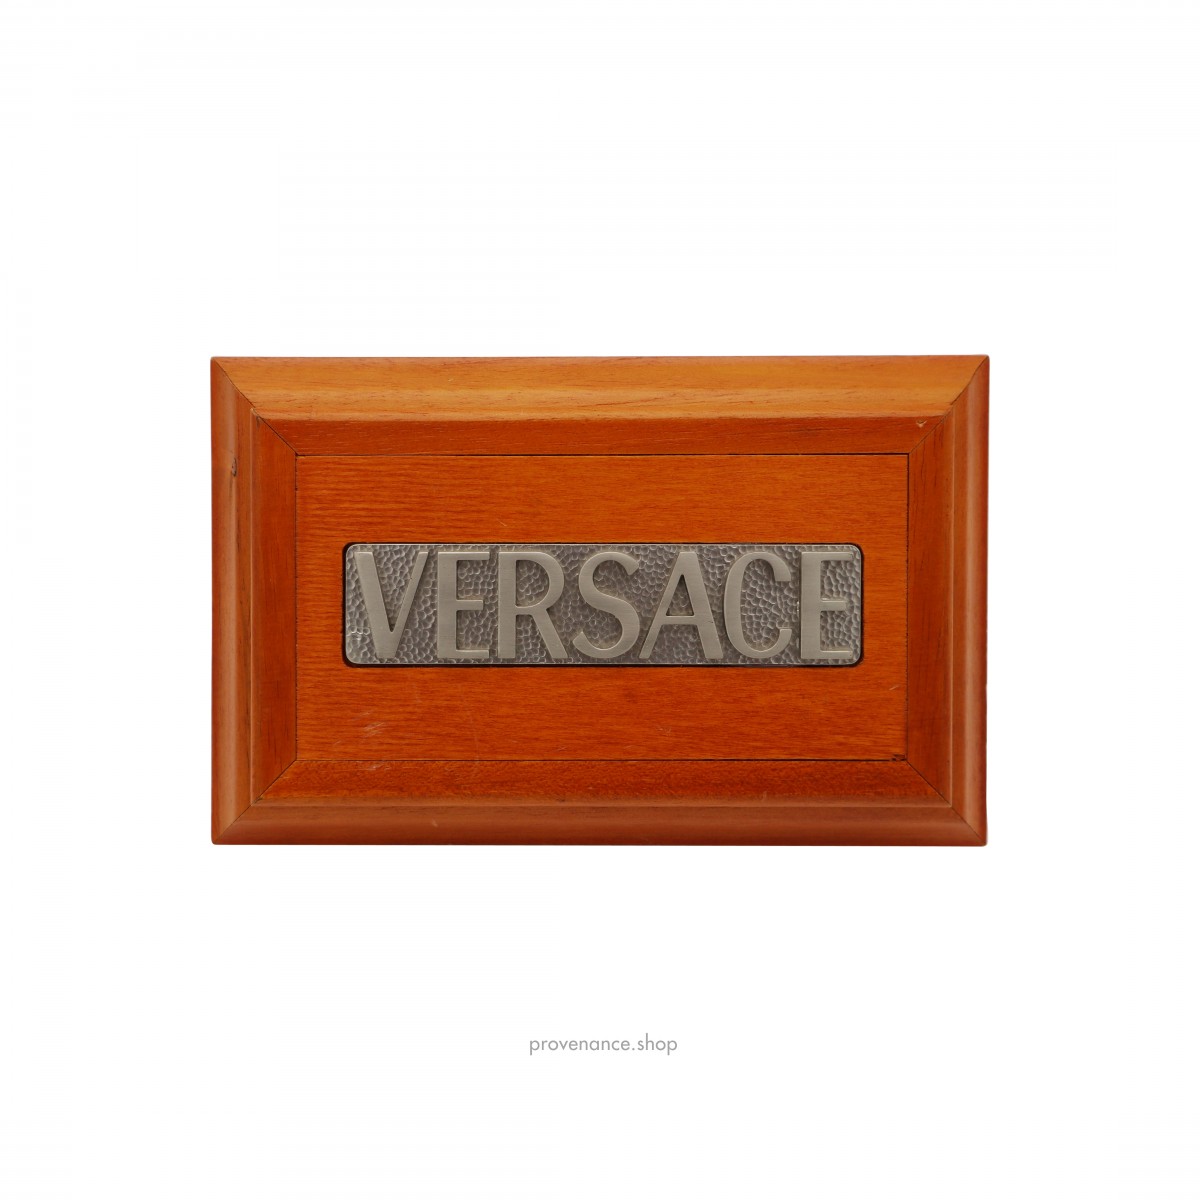 Versace Retail Store Sign - 1